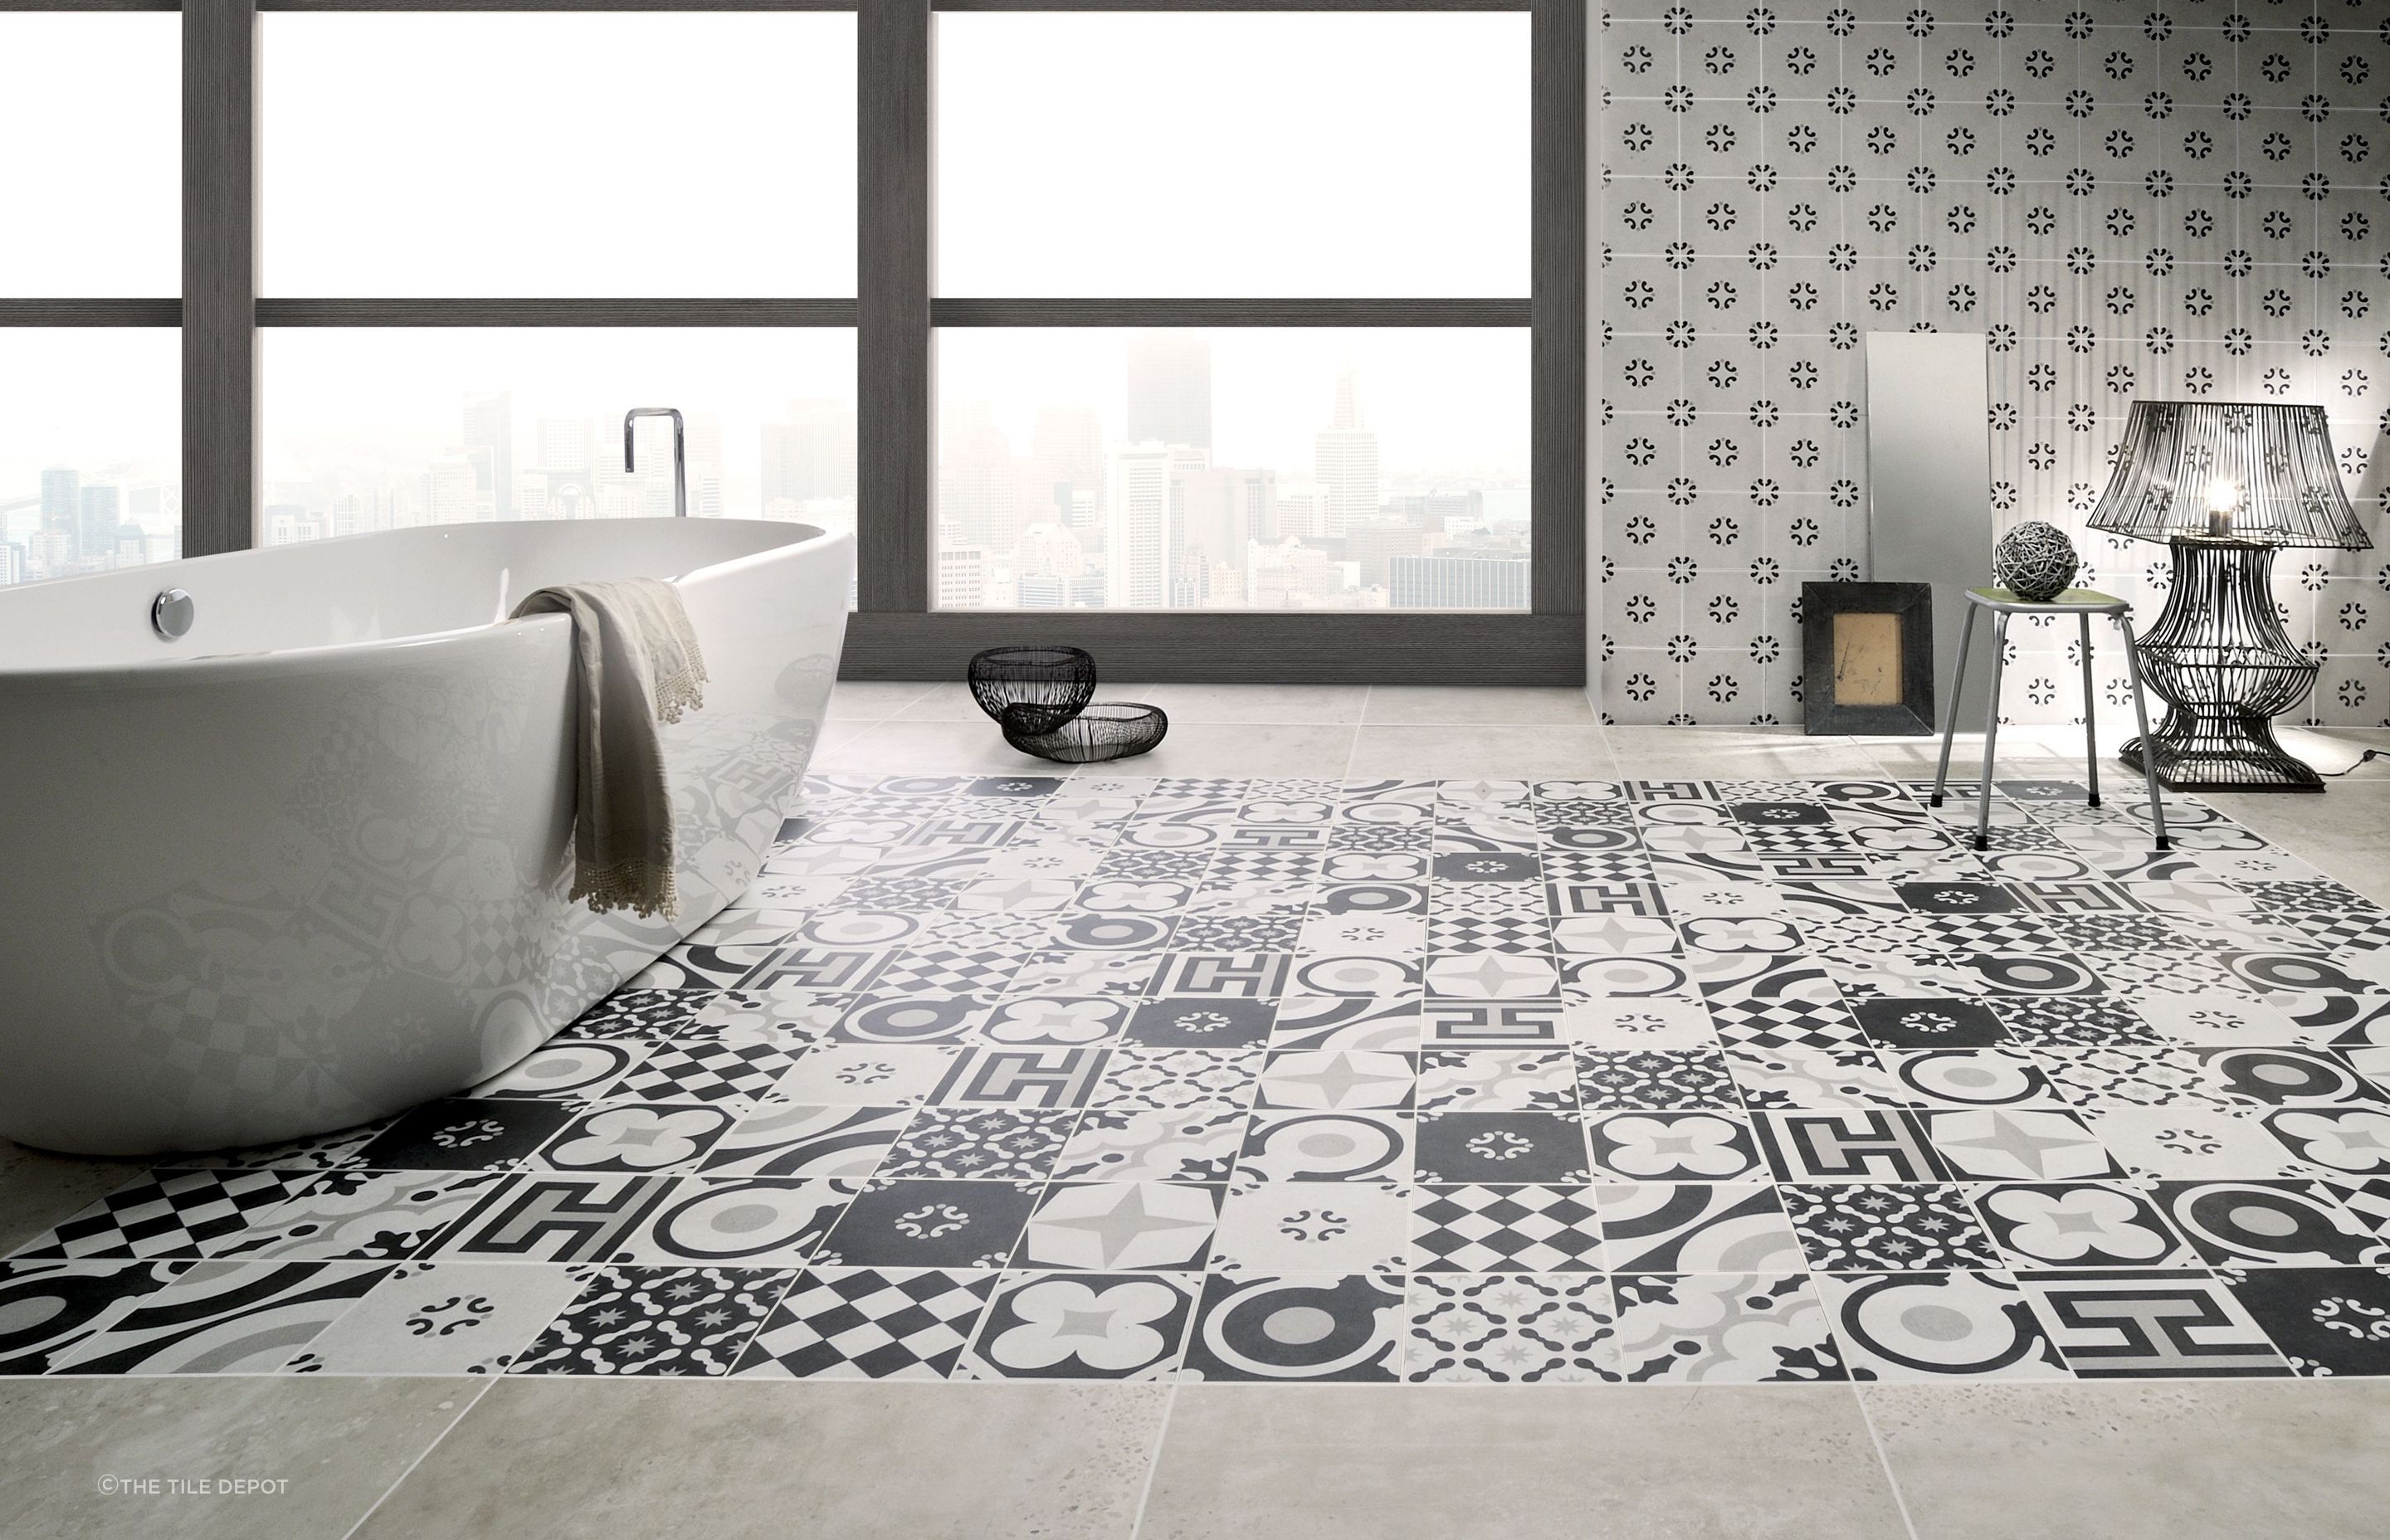 These encaustic tiles combine old-world charm with contemporary monochrome design